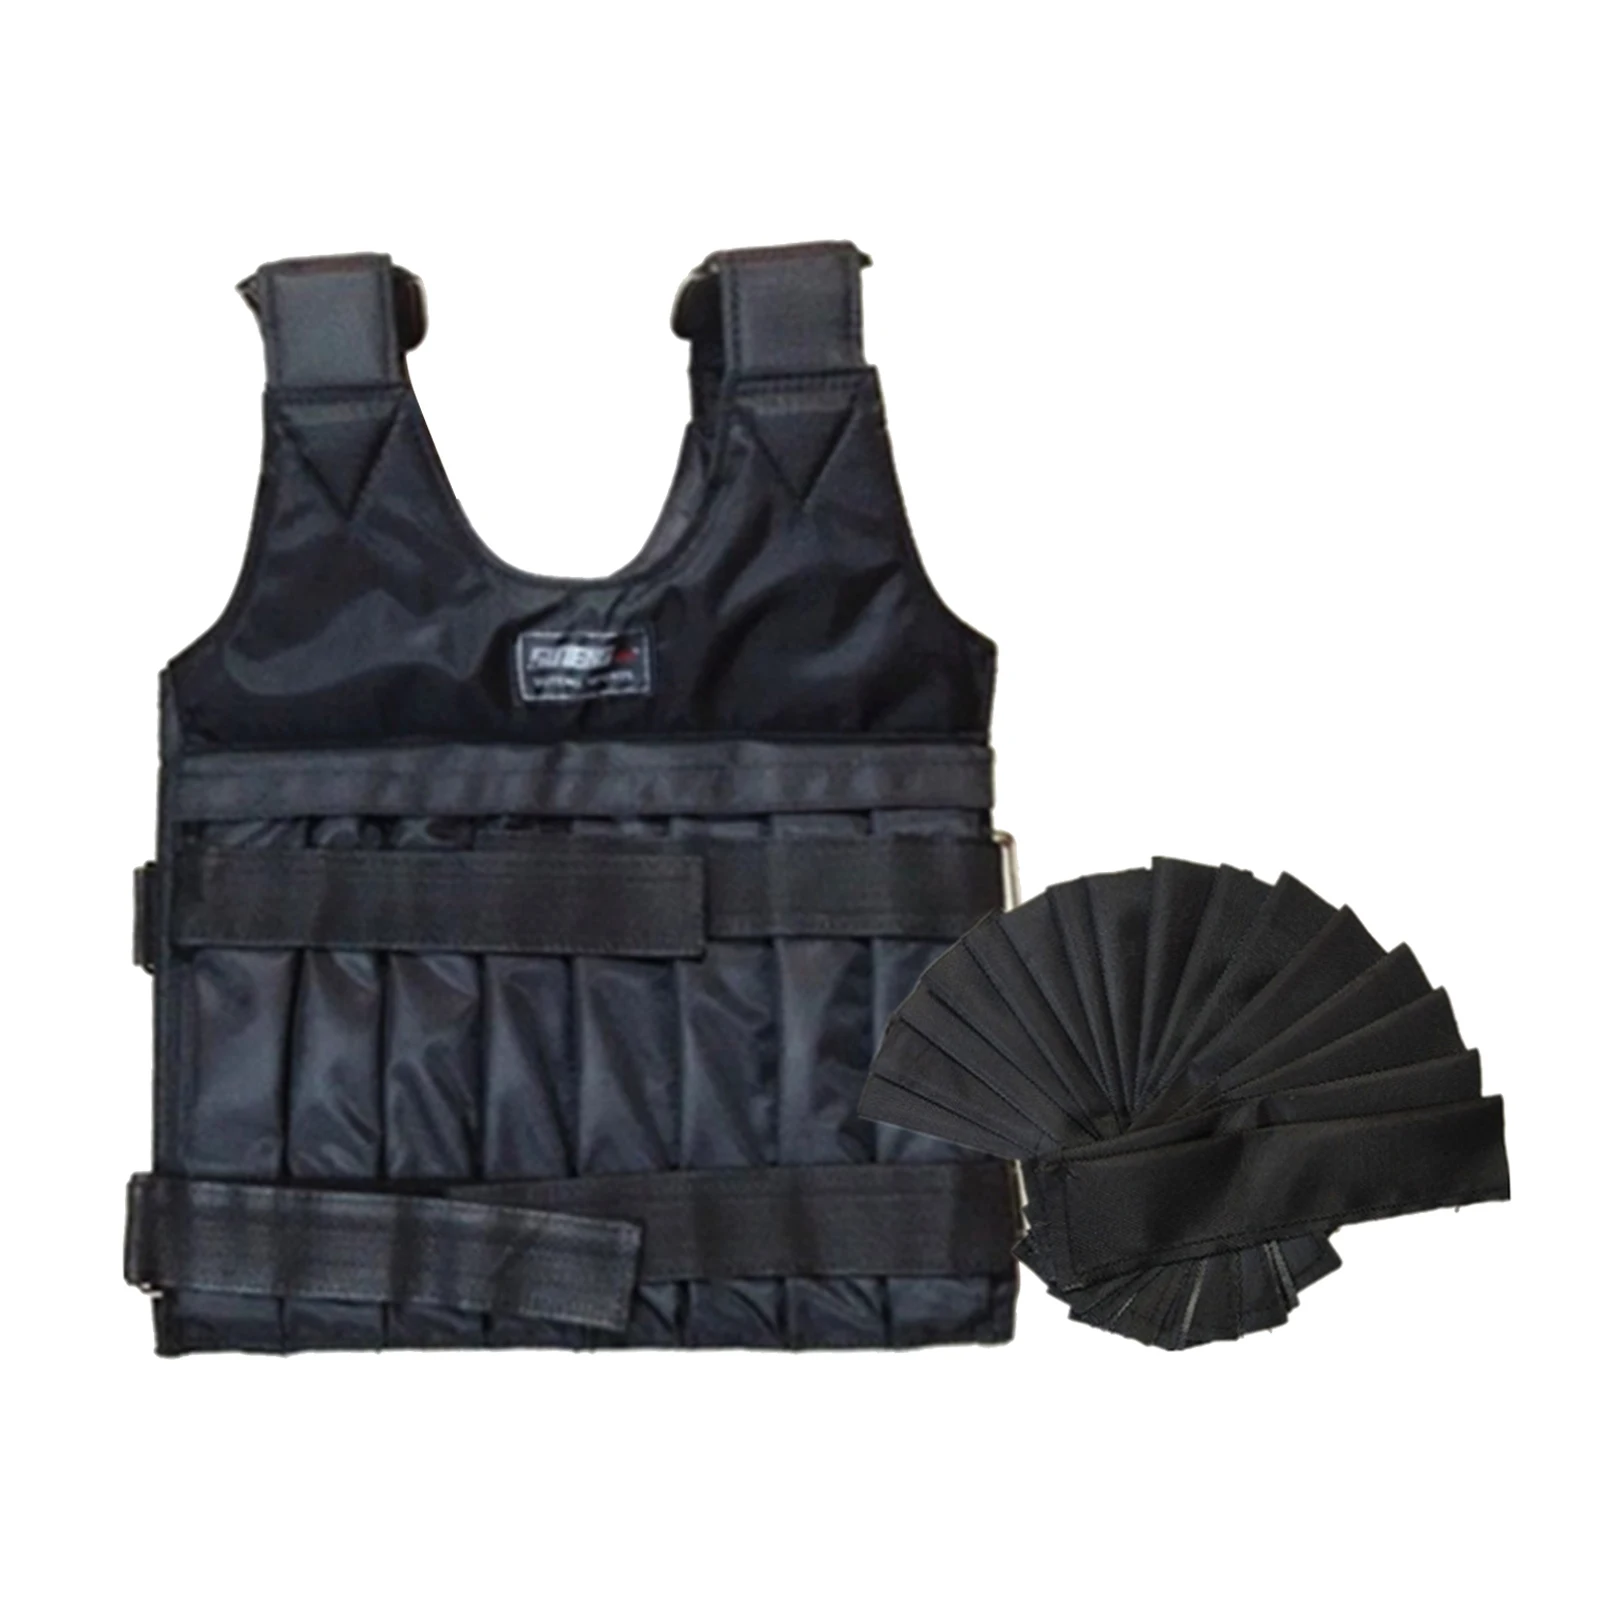 20KG Weighted Vest For Boxing Weight Training Workout Fitness Gym Equipment Adjustable Waistcoat Jacket Sand Clothing